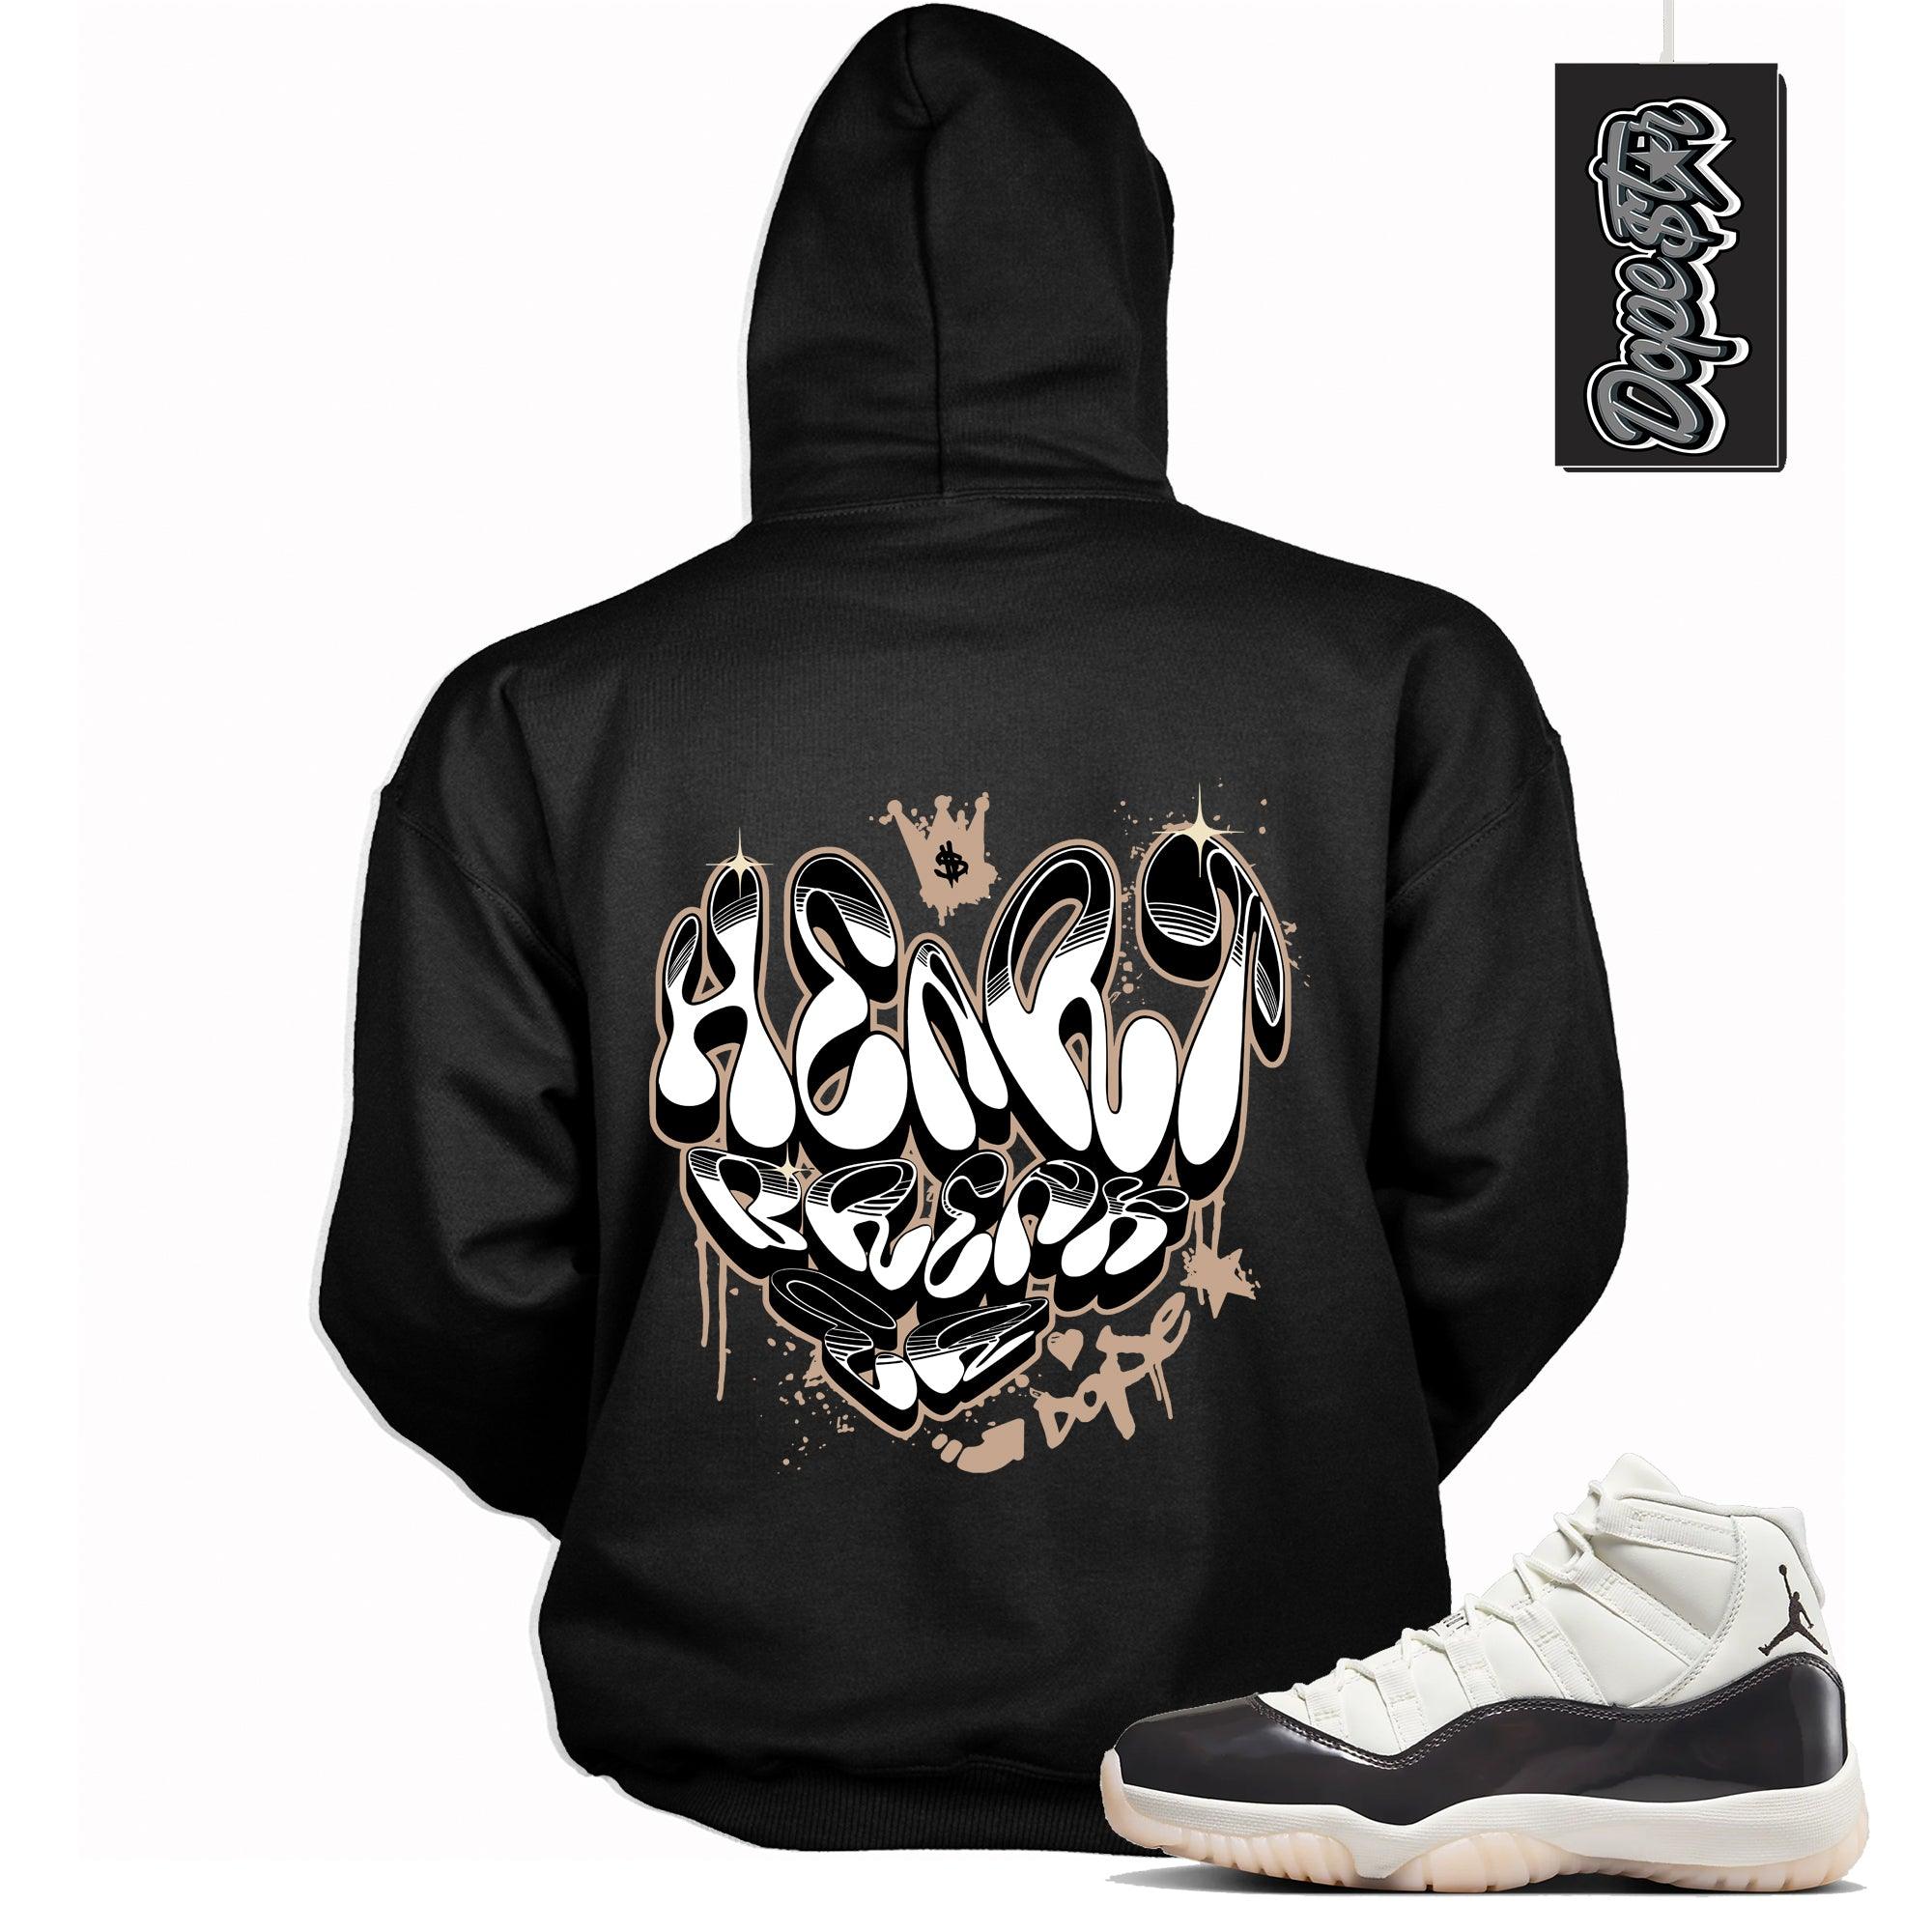 Cool Black Graphic Hoodie with “ Heart Breaker “ print, that perfectly matches Air Jordan 11 Neapolitan sneakers